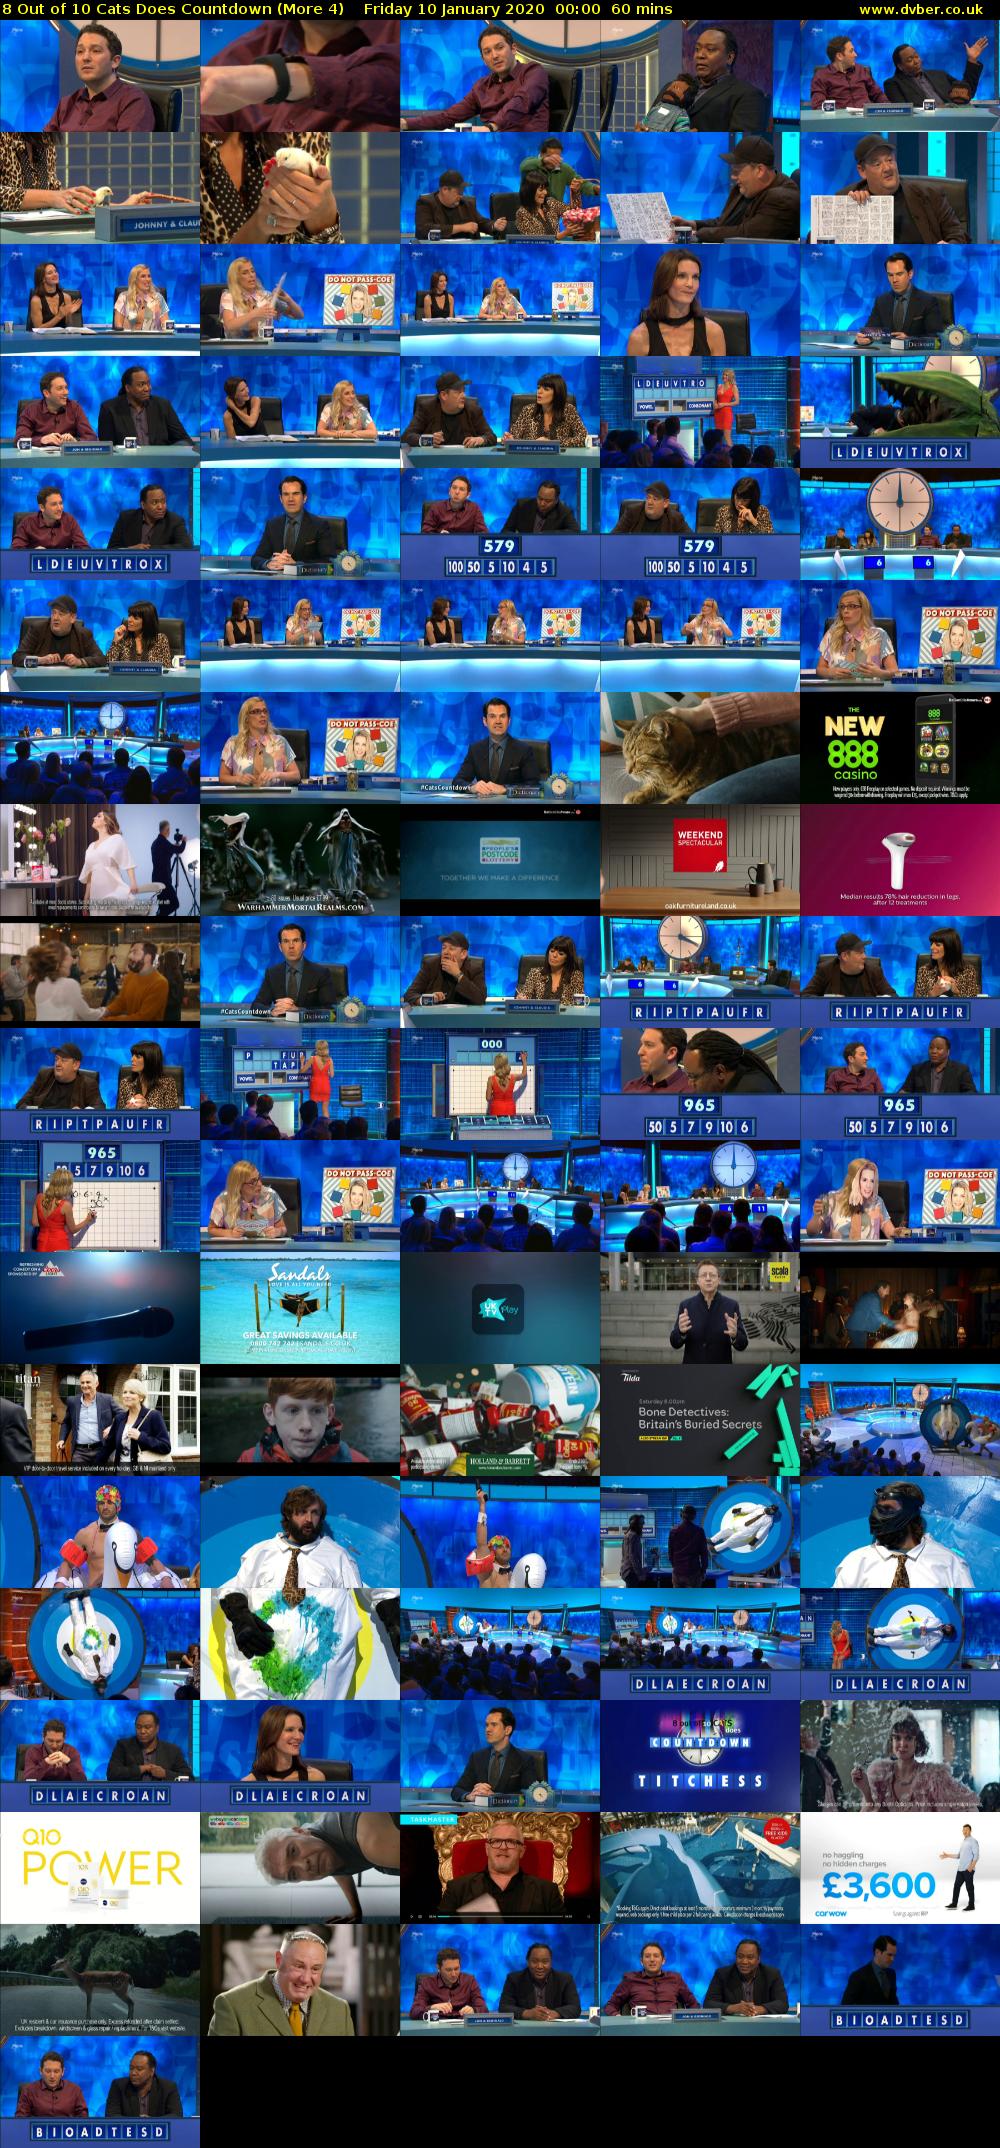 8 Out of 10 Cats Does Countdown (More 4) Friday 10 January 2020 00:00 - 01:00